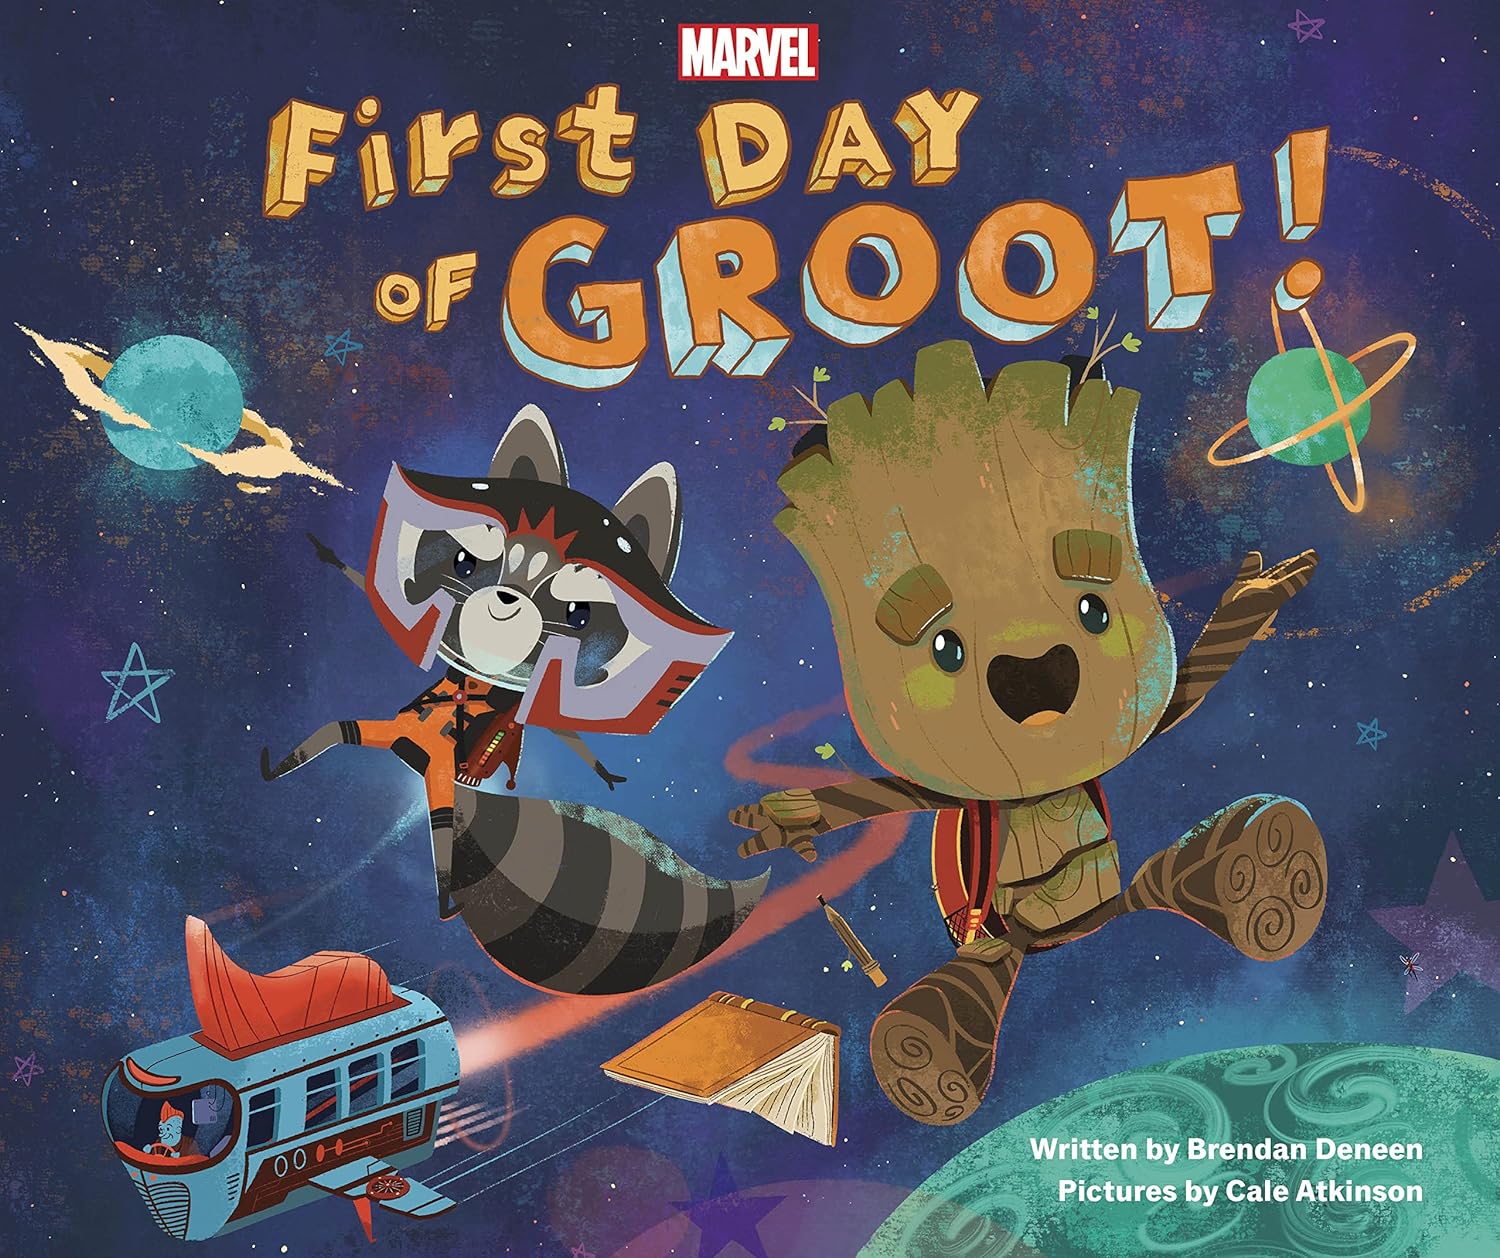 FIRST DAY OF GROOT YR PICTURE BOOK HC